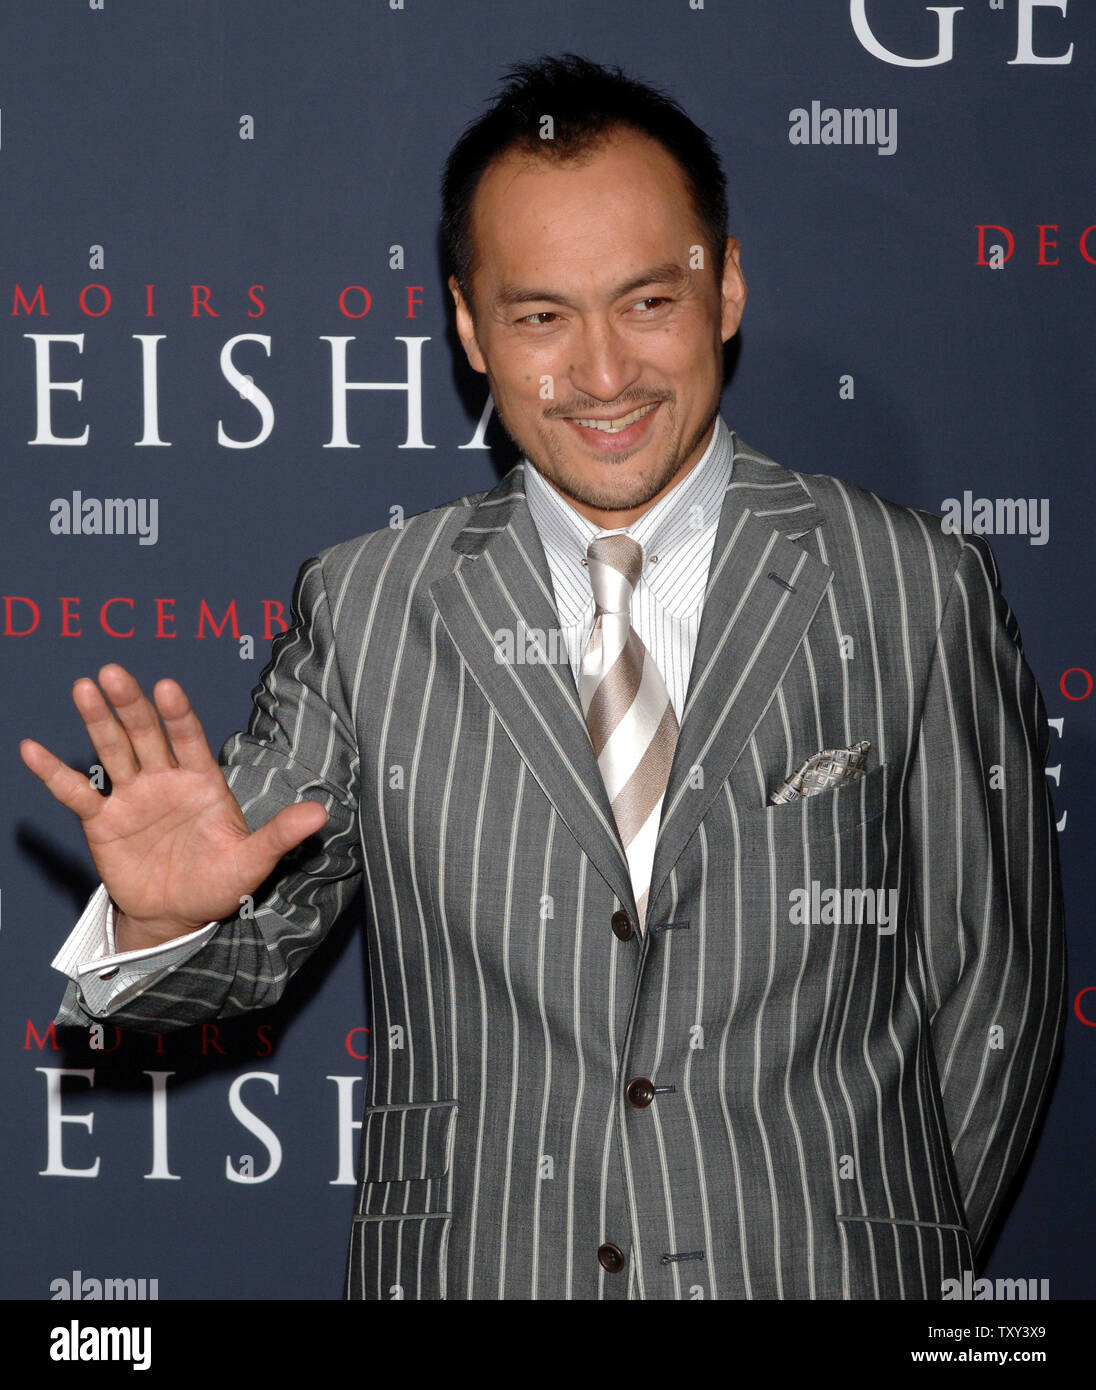 Japanese actor Ken Watanabe, a cast member in the romantic drama motion picture 'Memoirs of a Geisha' arrives for the premiere of the film at the Kodak Theatre in the Hollywood section of Los Angeles, California December 4, 2005. The movie is based on the novel by Arthur Golden and tells the story of a Japanese child (Zhang) who goes from working as a maid in a geisha house to becoming the legendary geisha Sayuri. The movie opens in the U.S. December 9.  (UPI Photo/Jim Ruymen) Stock Photo